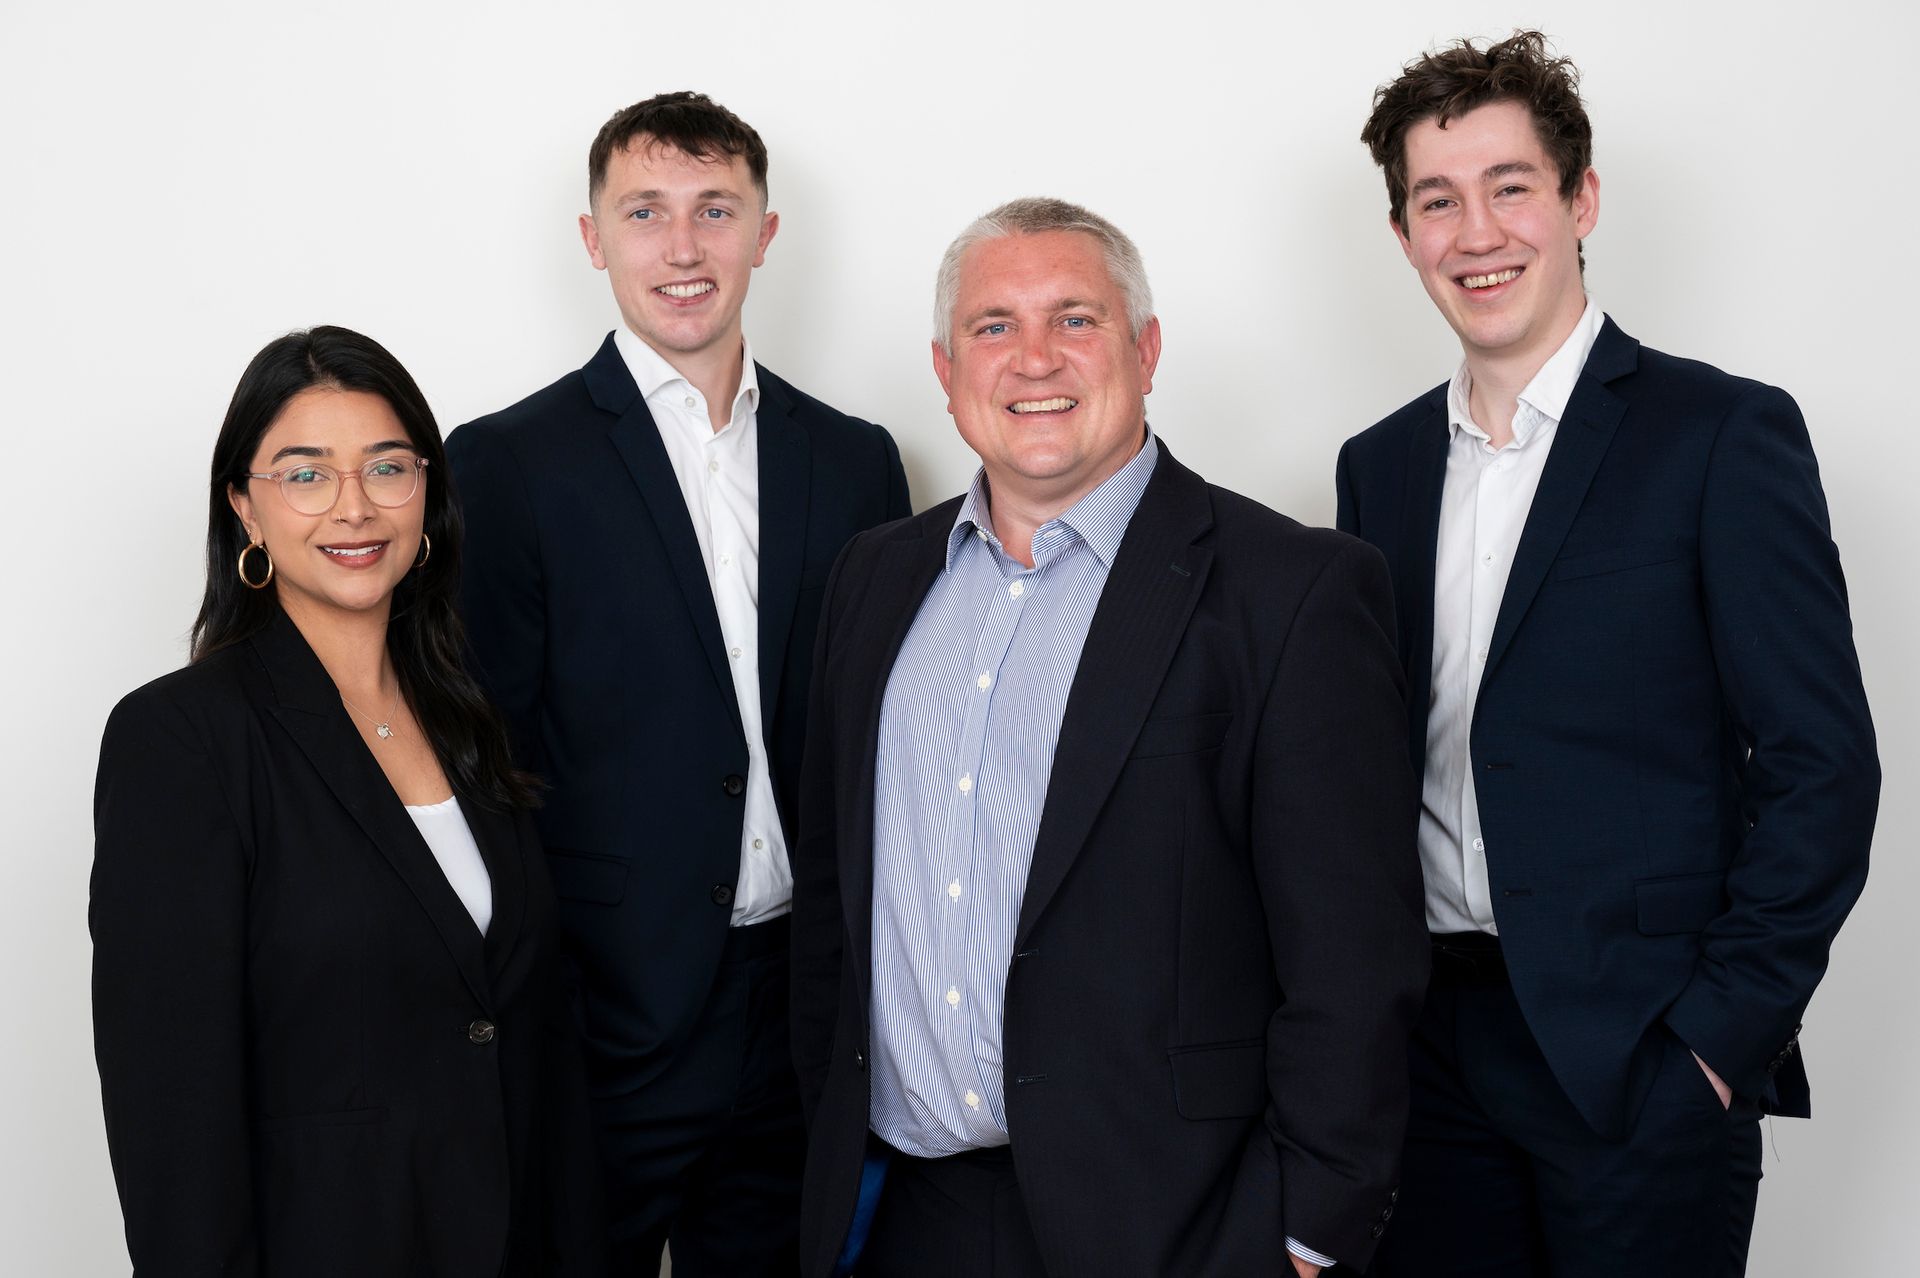 Specialist Investment Recruitment Agency